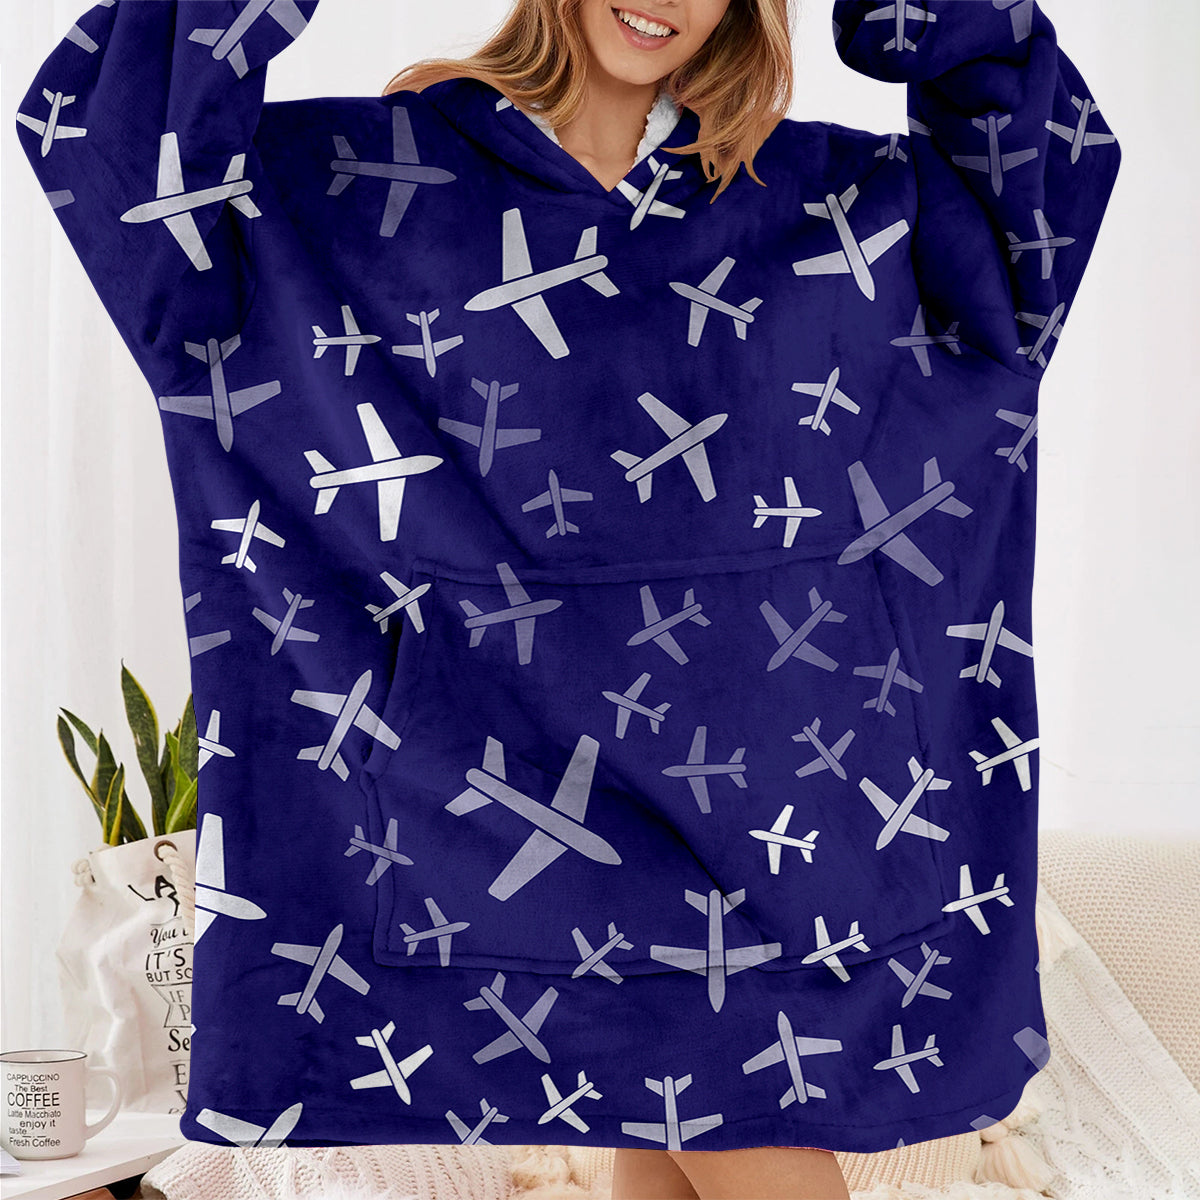 Different Sizes Seamless Airplanes Designed Blanket Hoodies